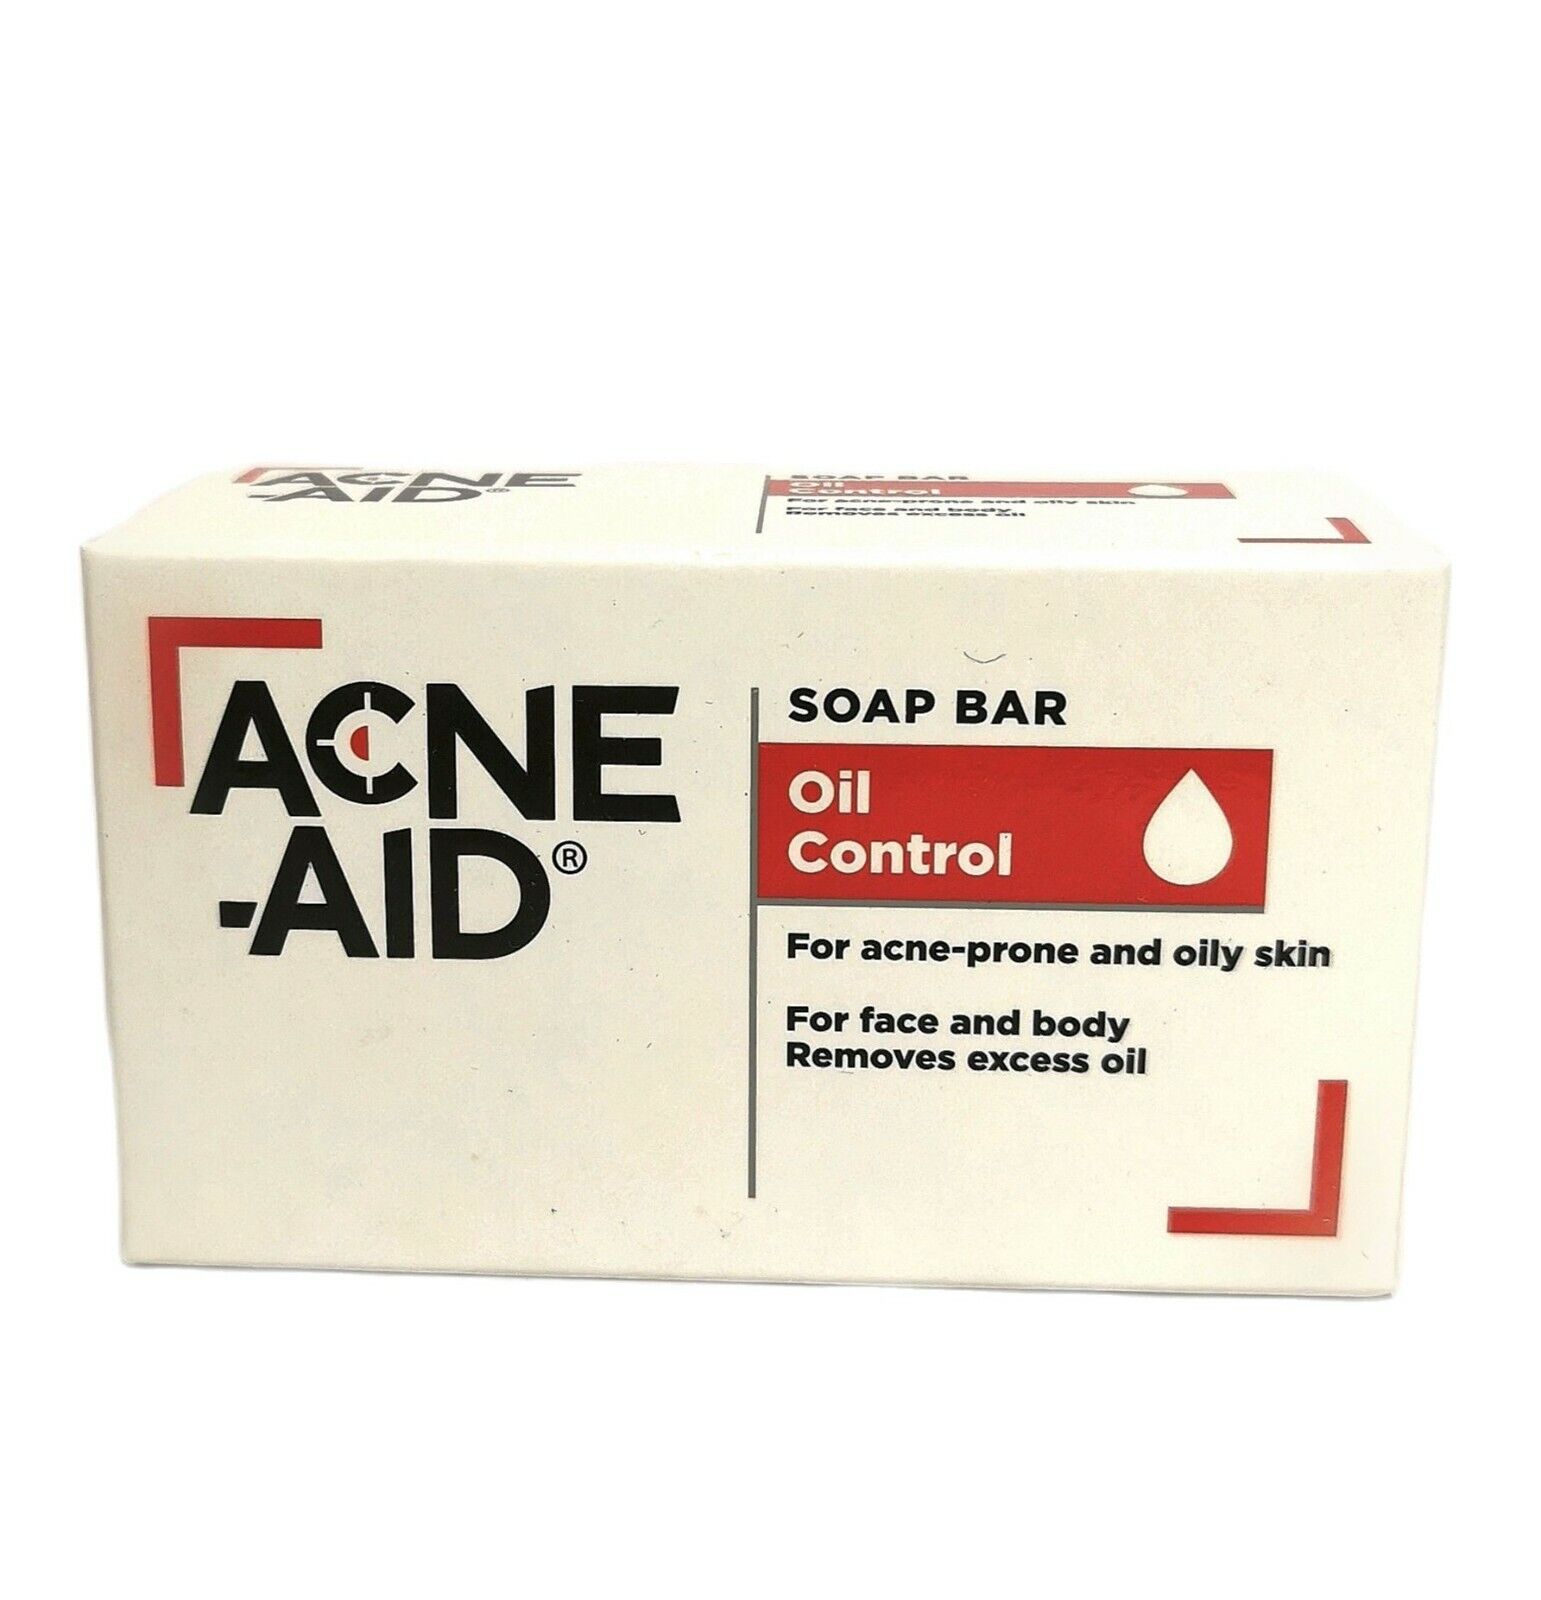 ACNE-AID Face and Body Soap Bar Oil Control 8x100g For Acne Prone and Oily Skin Acne-Aid - фотография #2